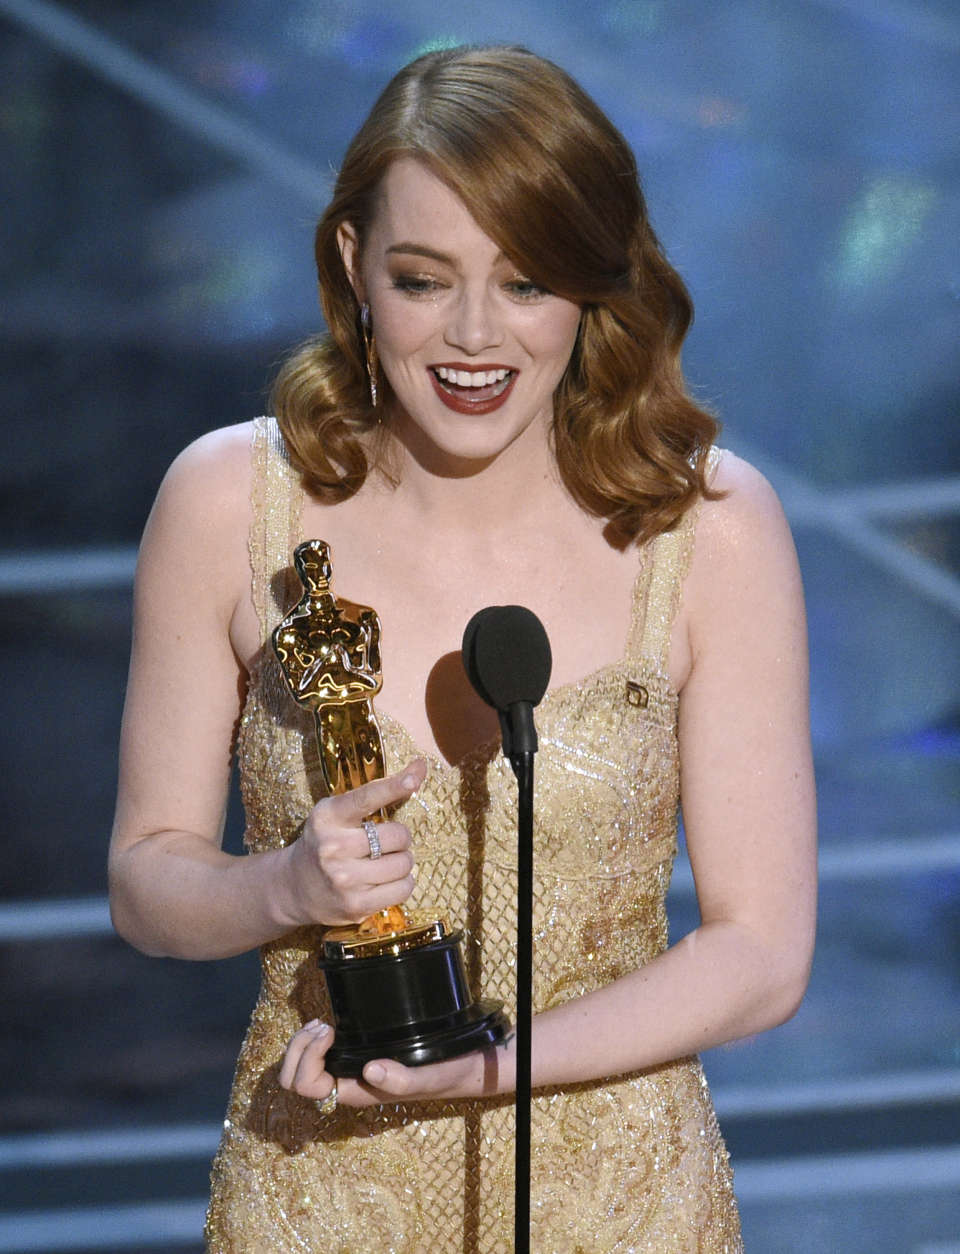 Emma Stone accepts the award for best actress in a leading role for "La La Land" at the Oscars on Sunday, Feb. 26, 2017, at the Dolby Theatre in Los Angeles. (Photo by Chris Pizzello/Invision/AP)